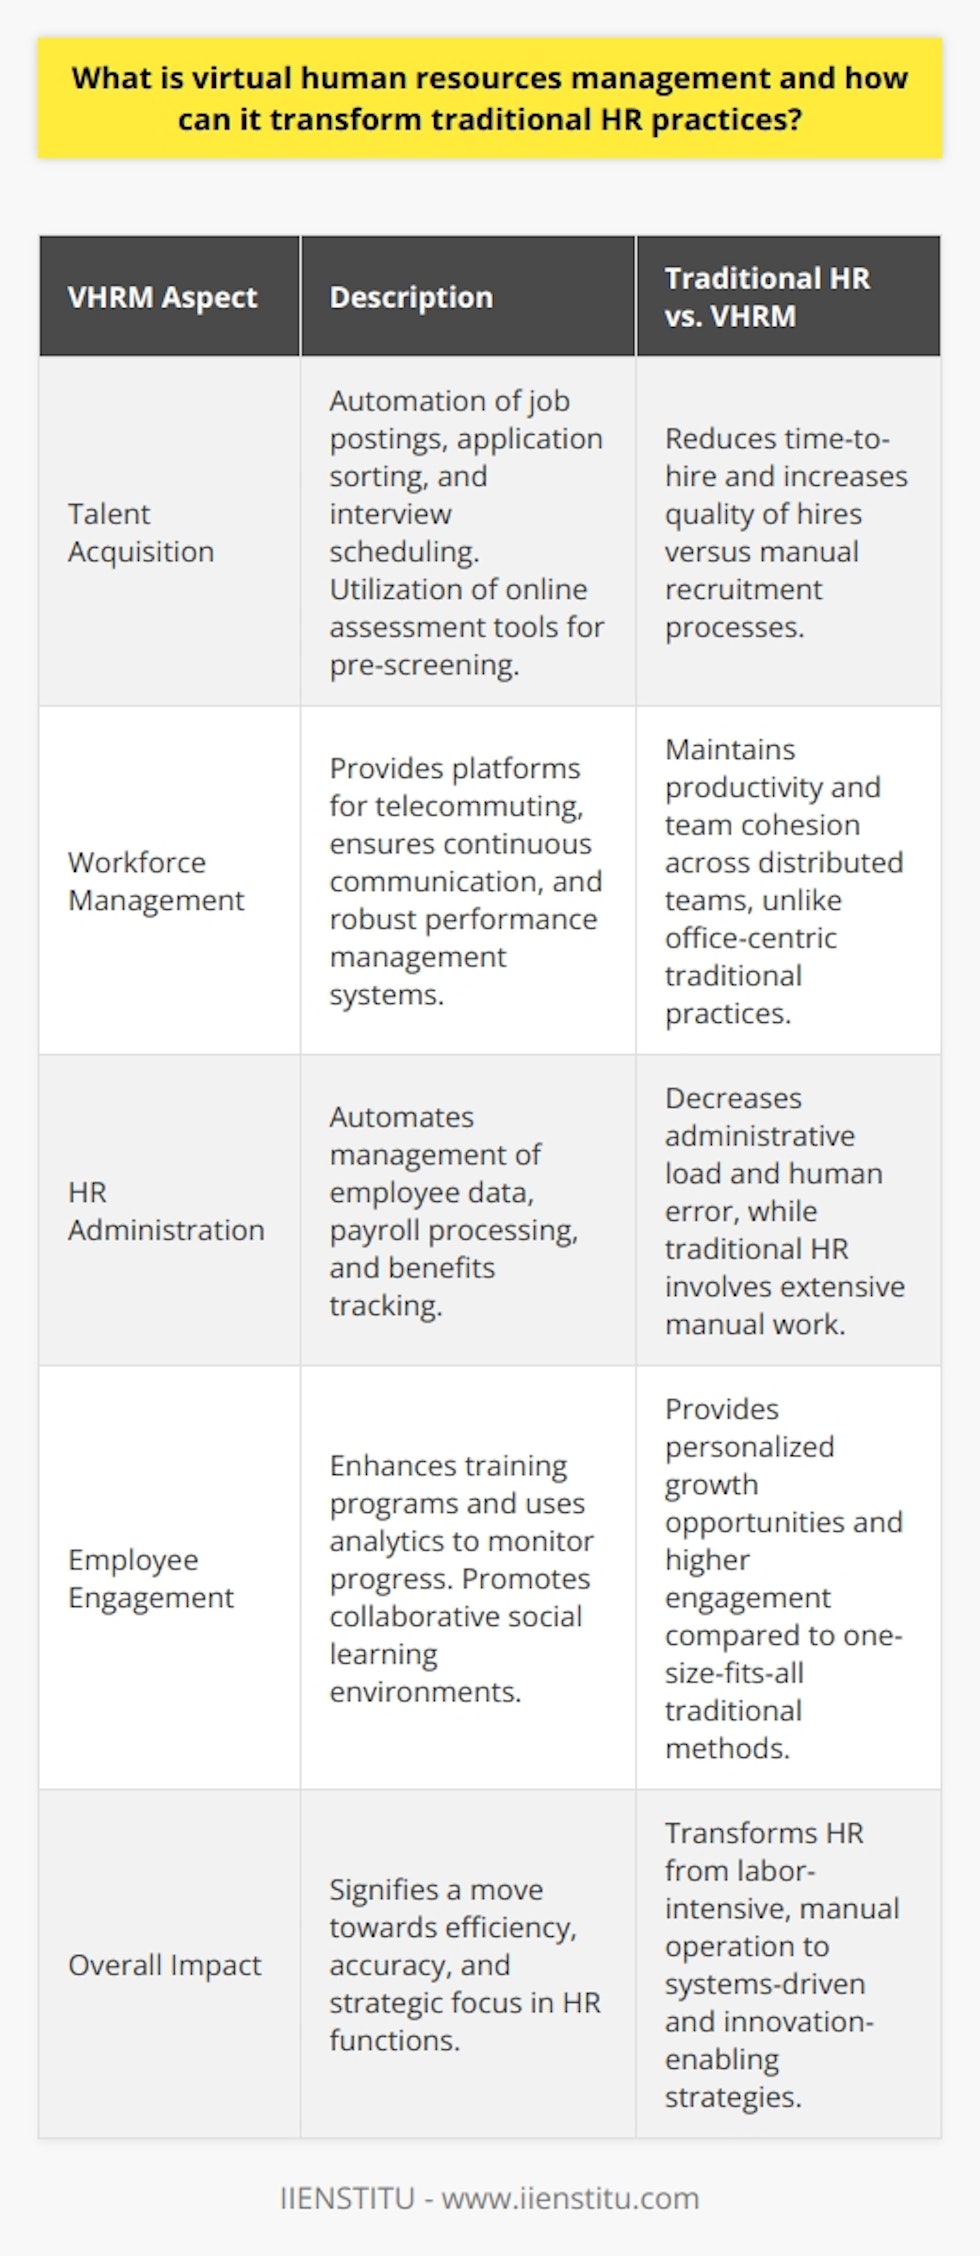 Virtual Human Resources Management (VHRM) signifies an evolution in how organizations can handle HR tasks leveraging the power of digital technology. By embracing VHRM, firms are able to remodel the spectrum of HR functions from talent acquisition to performance analysis, fundamentally altering the way these tasks are accomplished compared to traditional methods.Streamlining Talent AcquisitionRecruitment is one of the core features of HR and has been remarkably enhanced by VHRM systems. Advanced technology enables HR professionals to automate repetitive parts of the recruitment process like posting job ads, filtering through applications, and scheduling interviews. Online assessment tools allow for pre-screening candidates reliably and efficiently. Thus, organizations can focus on engaging the most promising candidates, trimming down time-to-hire, and enhancing the quality of hires.Transforming Workforce ManagementThe shifting landscape towards remote work has engendered a need for more agile HR solutions. VHRM answers this call by providing platforms that support telecommuting, promoting continuous communication and ensuring robust performance management systems are in place. This technological infrastructure is pivotal in managing a dispersed workforce, ensuring that productivity and team dynamics remain strong, regardless of physical location.Automating HR AdministrationWhen it comes to administrivia, VHRM shines by automating processes like managing employee data, payroll processing, and tracking benefits. These solutions minimize human error and the administrative burden on HR teams. By having these processes run in the background through smart systems, HR can divert its attention to strategic planning and execution, thereby better aligning HR initiatives with the corporate mission.Boosting Employee EngagementVHRM directly addresses the need for nurturing employee growth and maintaining high levels of engagement. Via digital platforms, HR teams can deliver personalized training programs and monitor progress with robust analytics tools. Furthermore, VHRM fosters a collaborative culture by encouraging social learning where employees engage, communicate, and share insights in a virtual space.In essence, Virtual Human Resources Management represents a seismic shift in HR, propelling departments away from the labour-intensive, manual processes of old to a future where efficiency, accuracy, and strategic thinking dominate. With the backing of sophisticated VHRM systems, organizations can expect not only to streamline their operations but also to unlock the full potential of their workforce in dynamic and innovative ways.